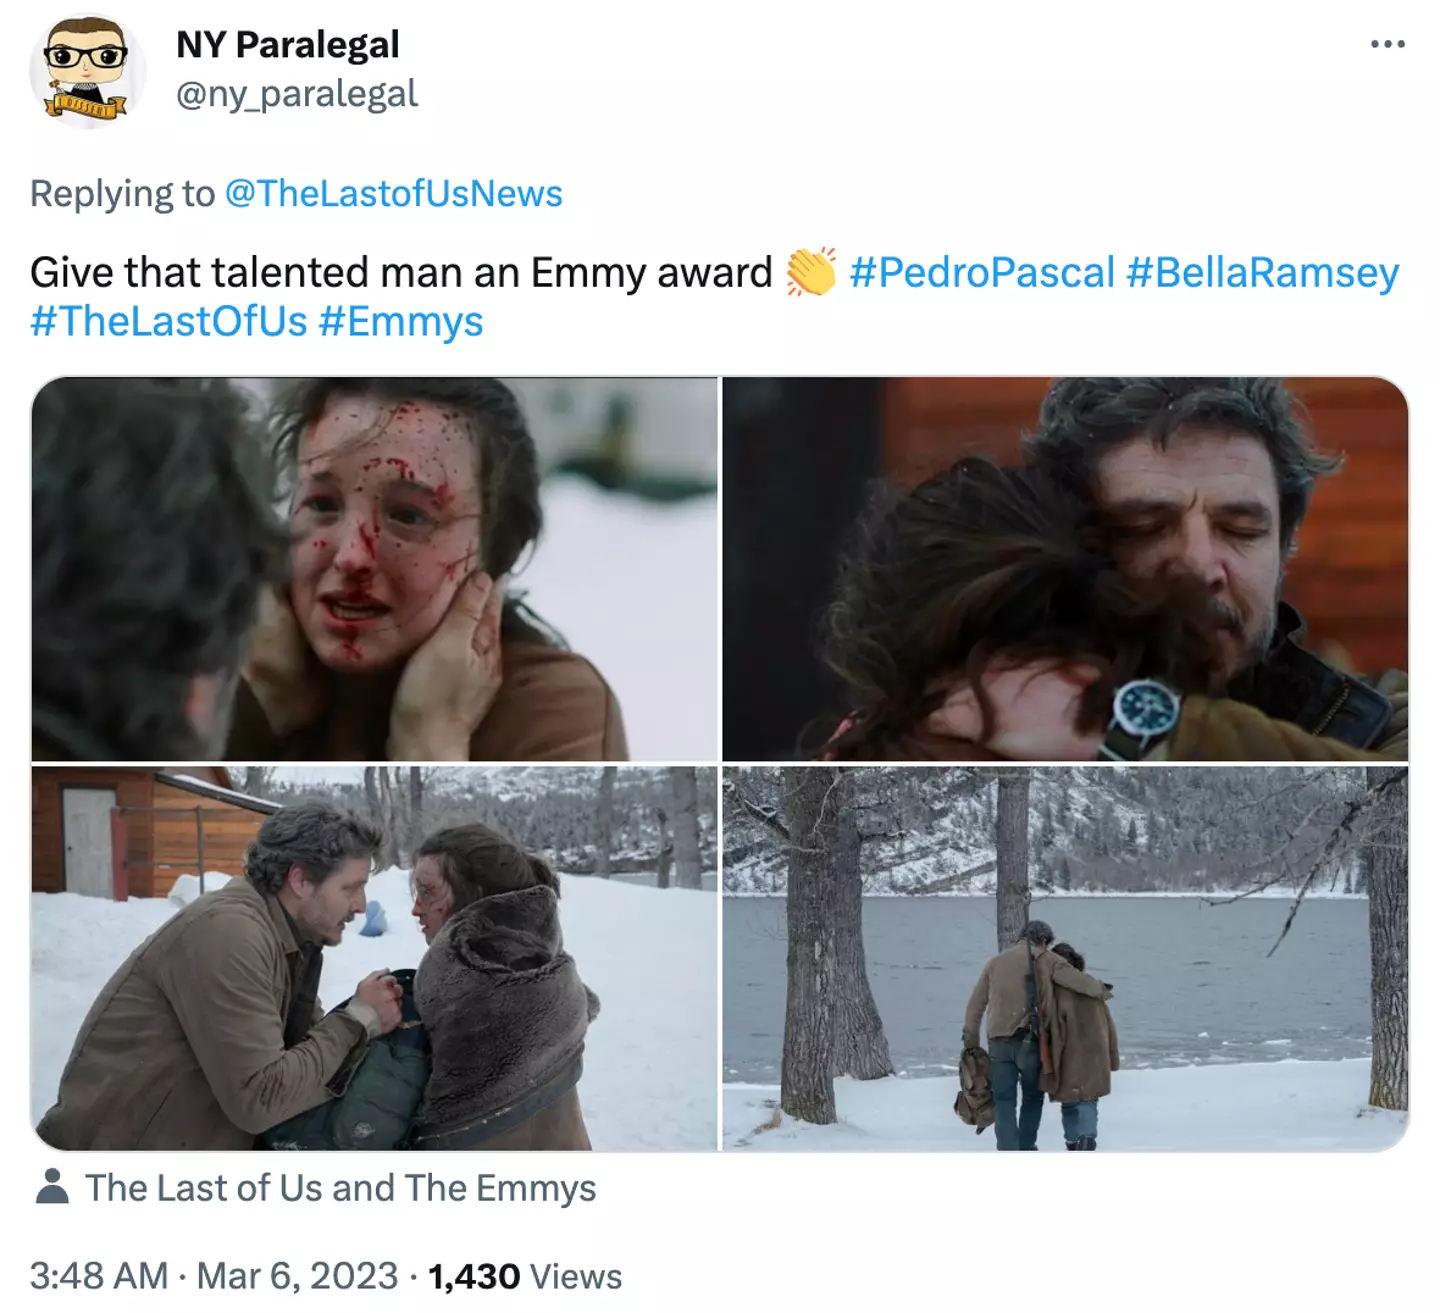 Fans think the pair deserve Emmys for their performance.